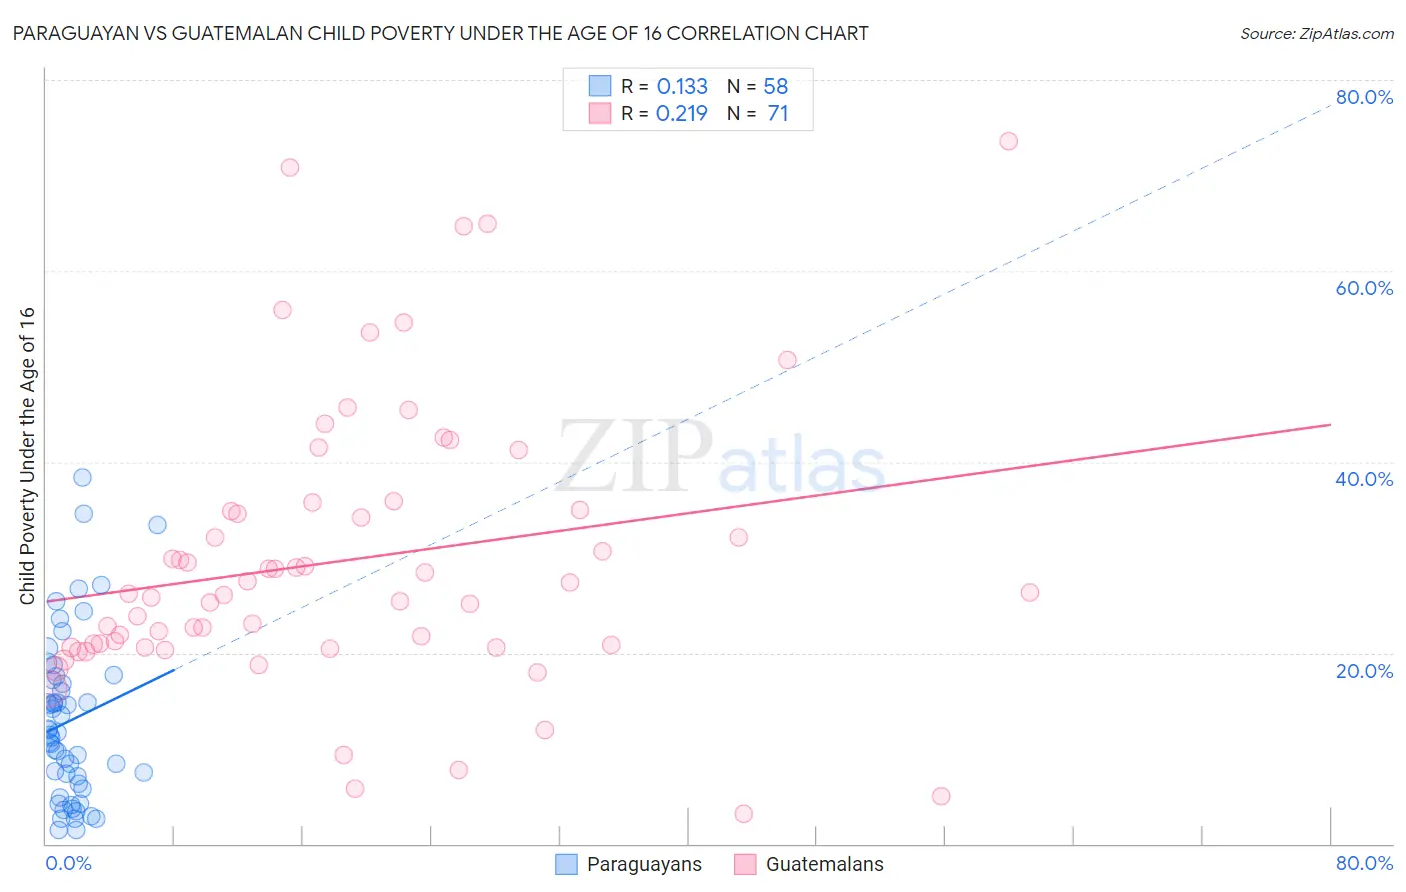 Paraguayan vs Guatemalan Child Poverty Under the Age of 16